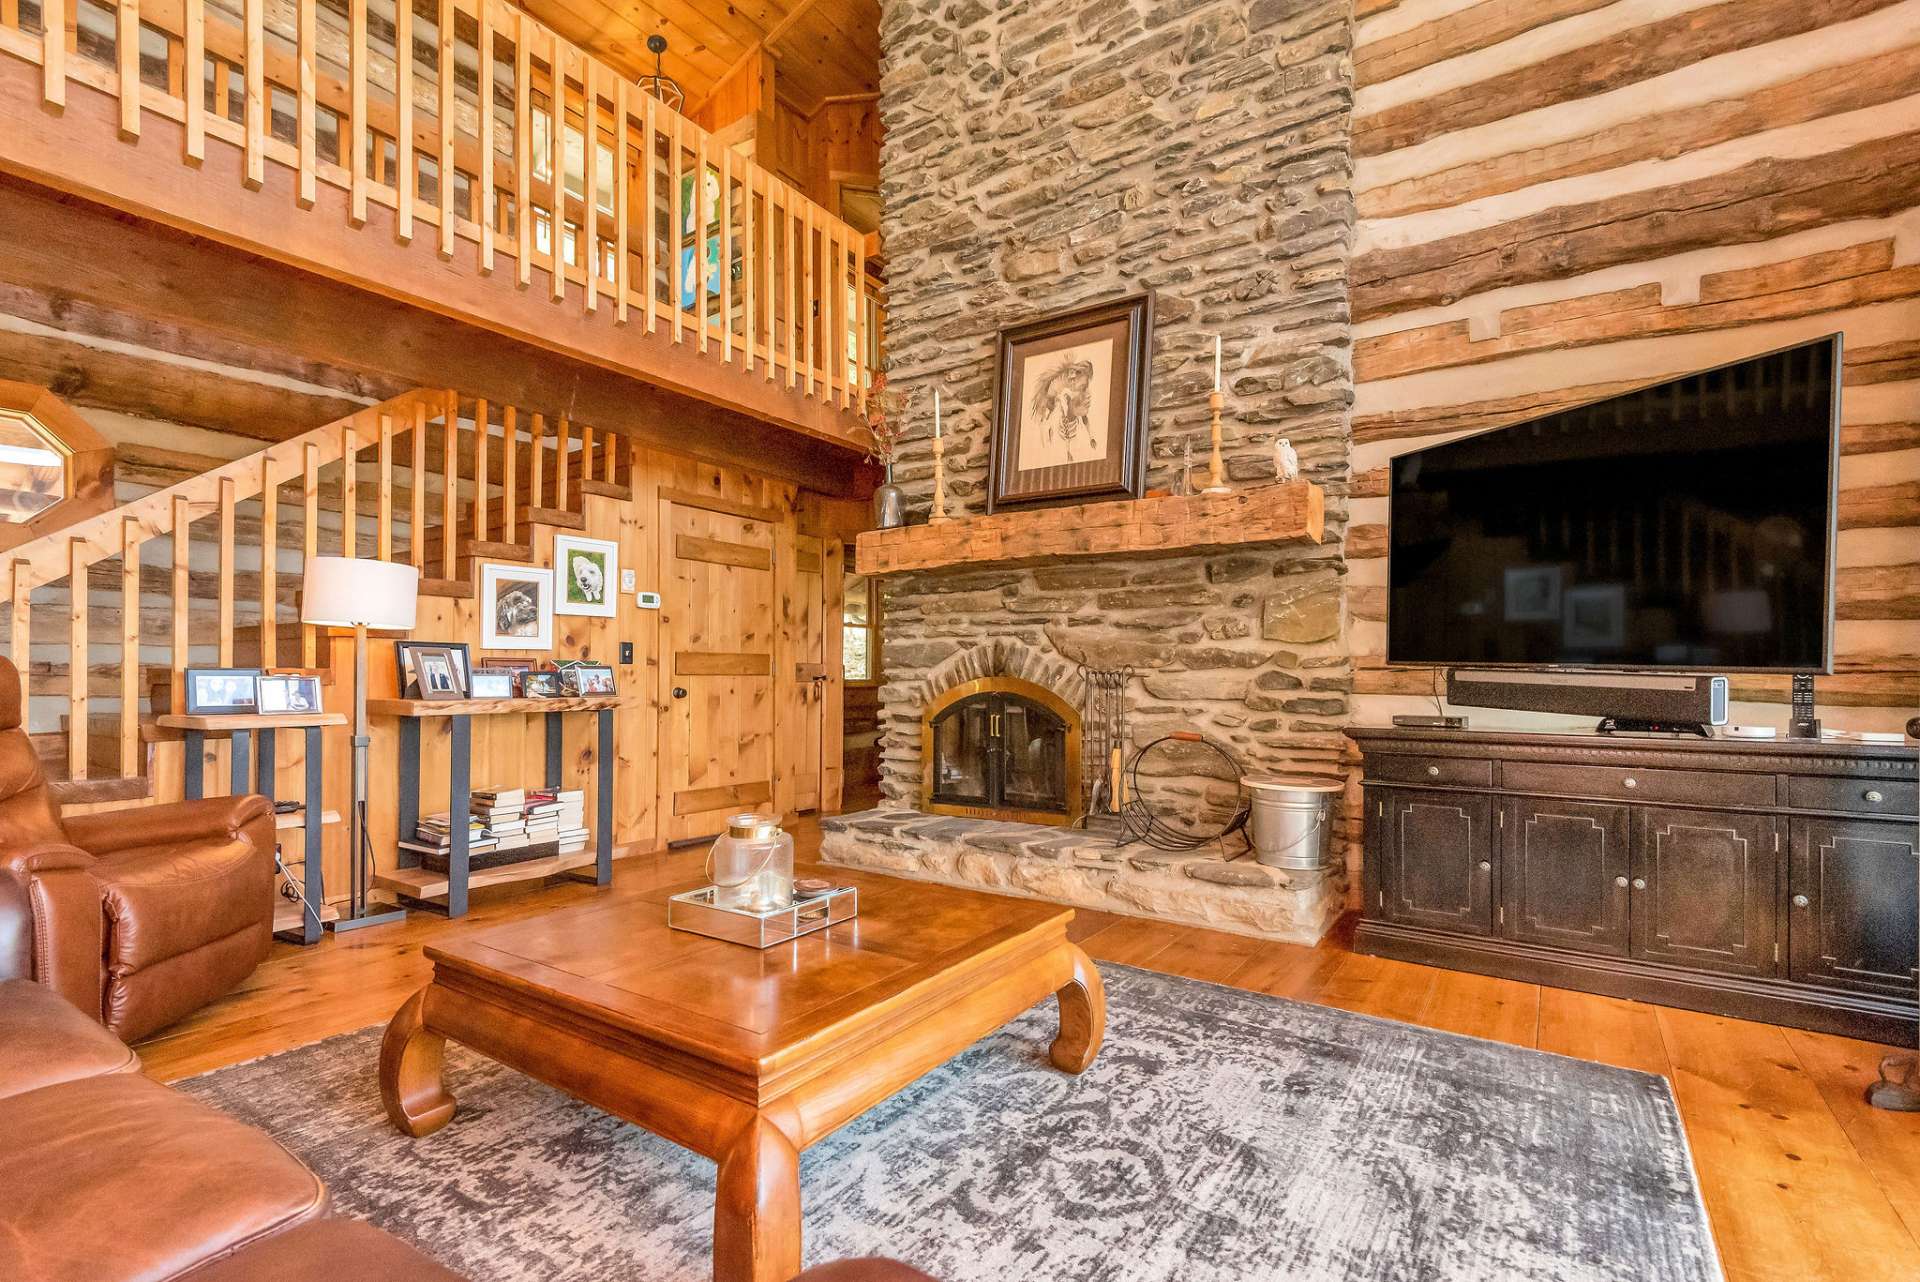 The wood-burning fireplace is a grand focal point with a peek of the second-floor living area.